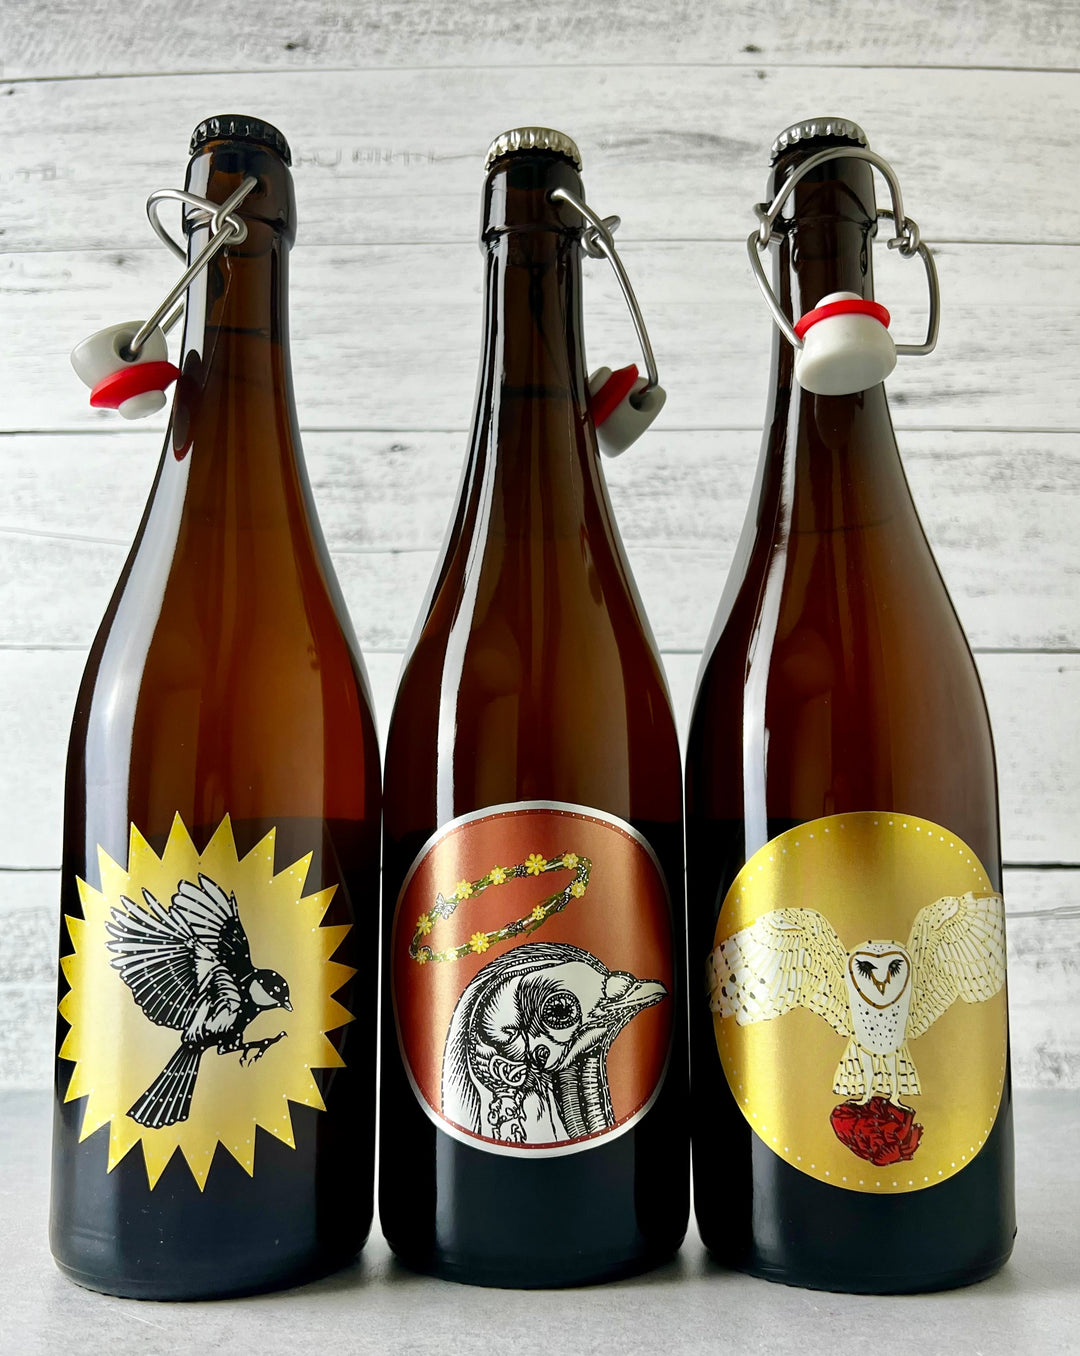 Three 750 mL bottles of Art + Science cider, depicting bird art on the labels - Clutch Cider, Birdbrain Perry, and Quince